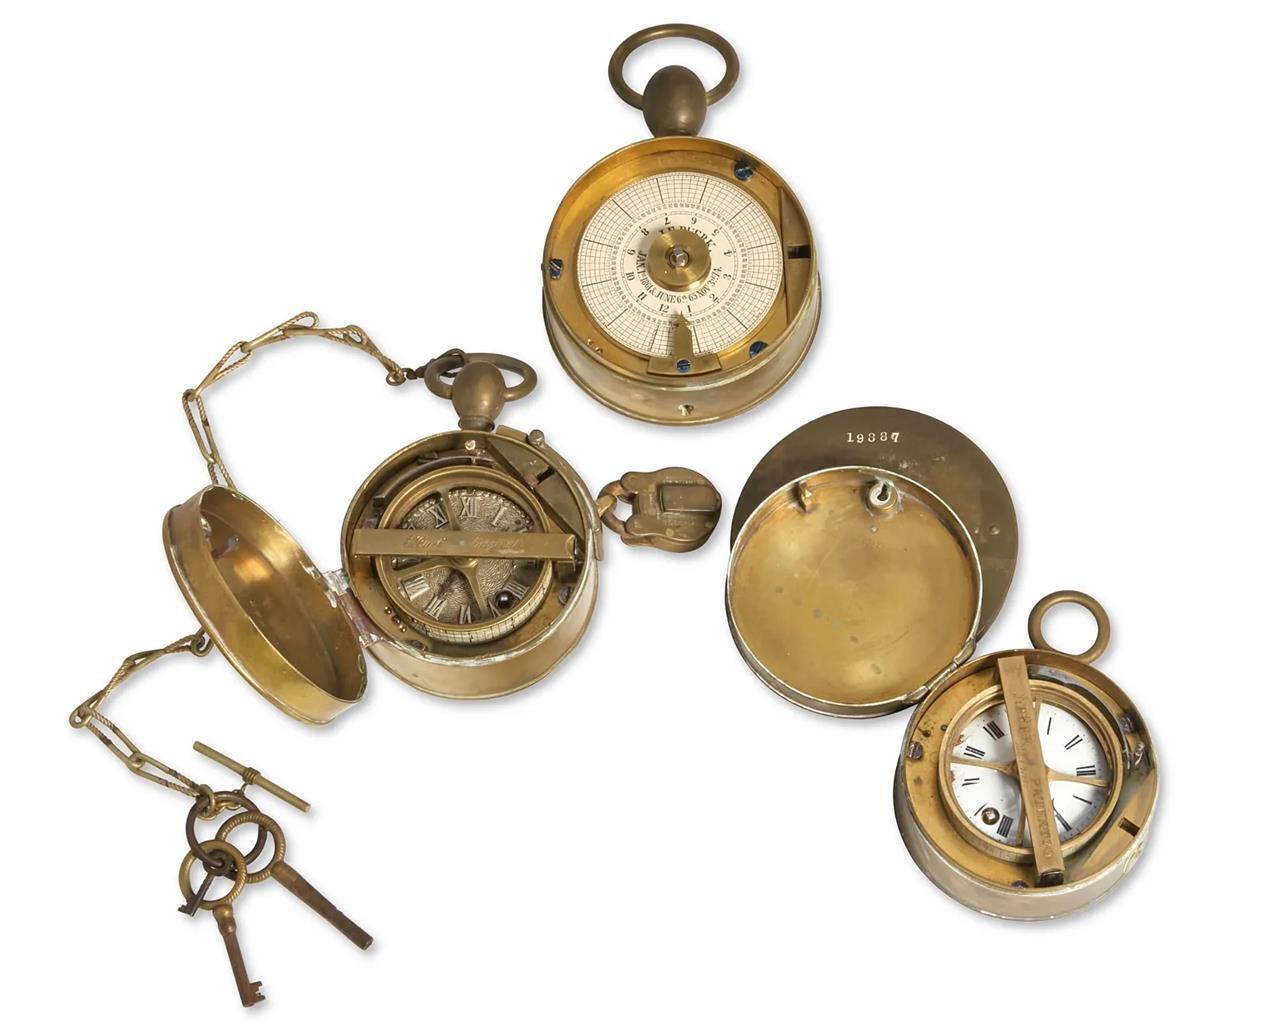 VERY EARLY & RARE GUARDSMEN BRASS CLOCK COLLECTION, SOME RUNNING